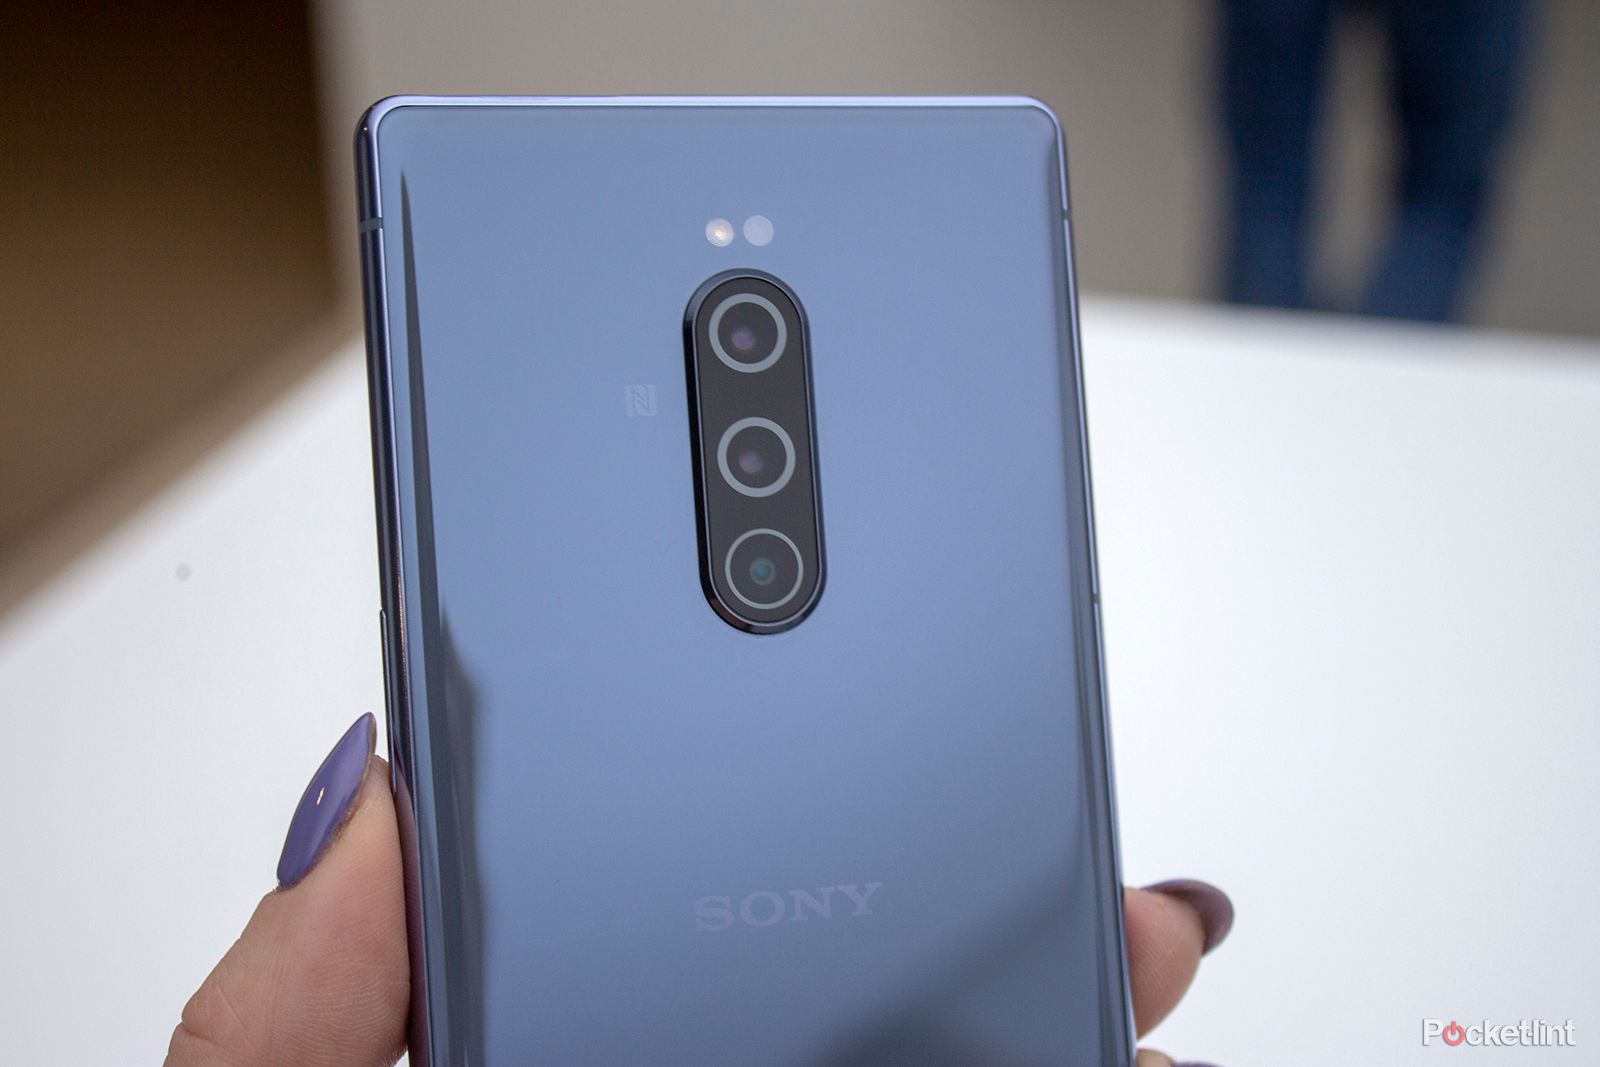 Sonys Xperia 1 Has Exclusive Versions Of Fortnite Asphalt 9 And Arena Of Valor image 1